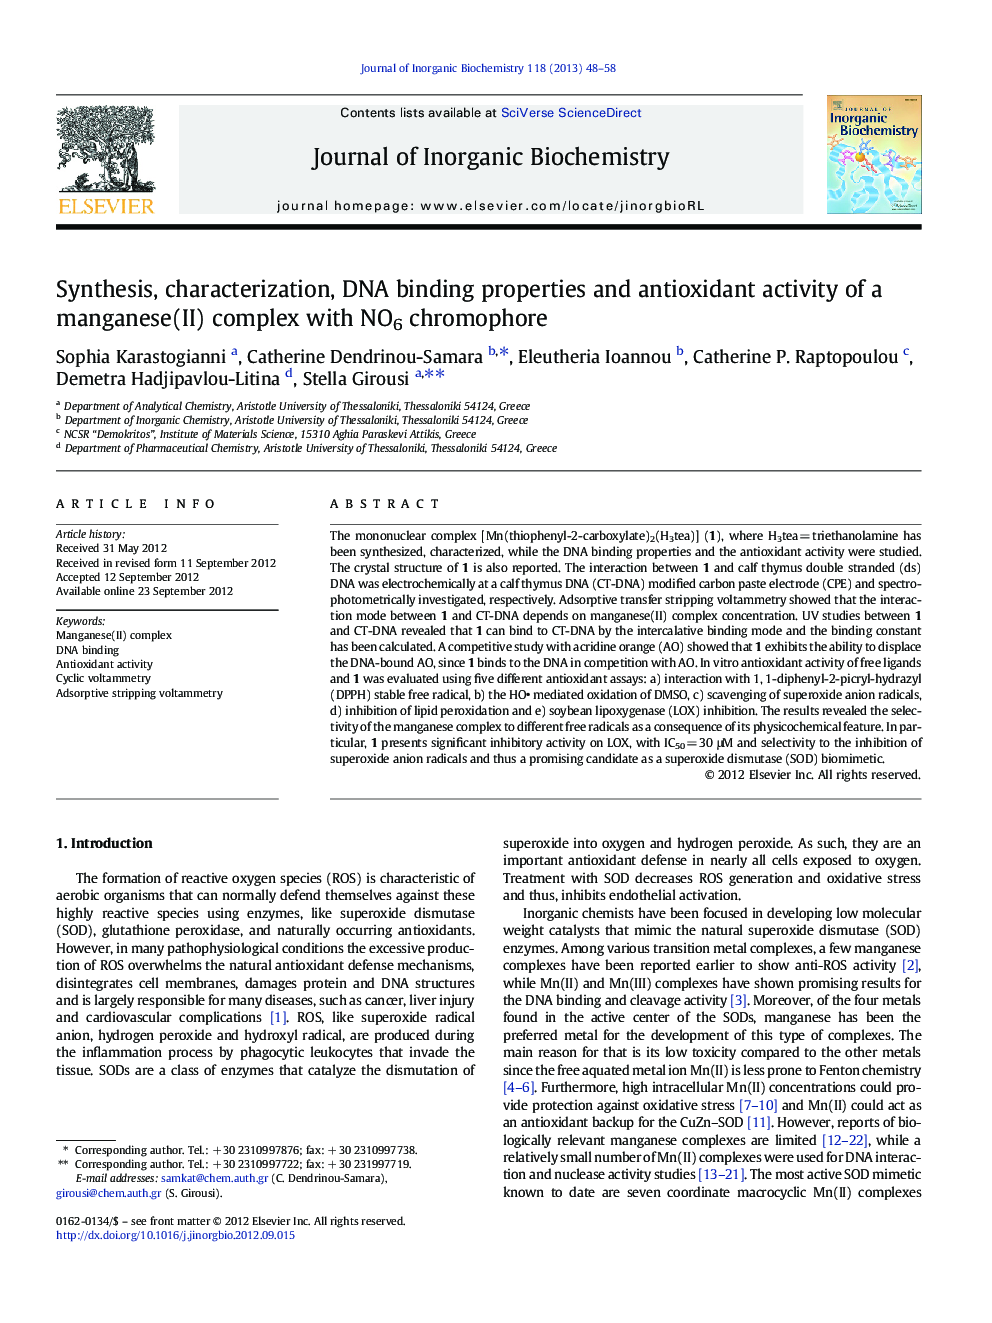 Synthesis, characterization, DNA binding properties and antioxidant activity of a manganese(II) complex with NO6 chromophore